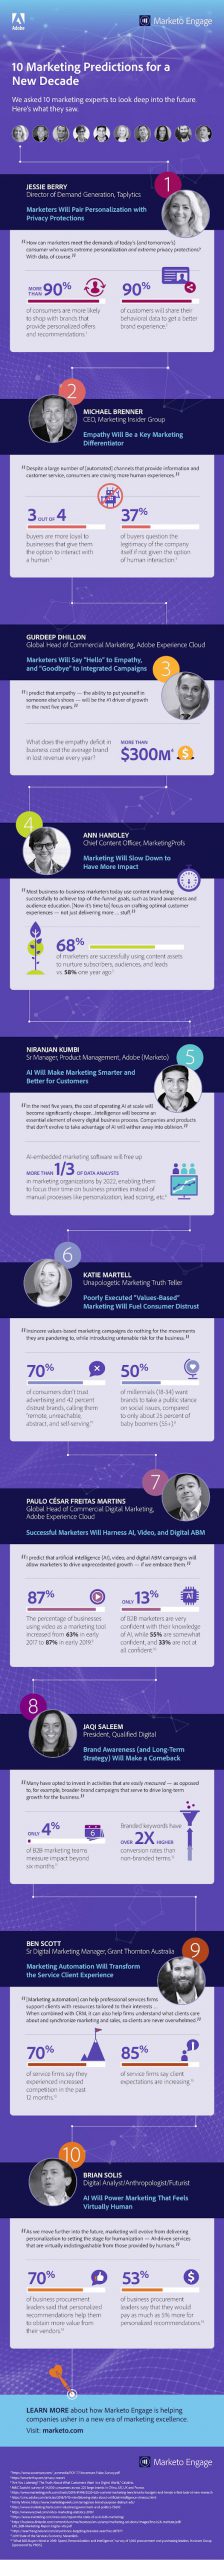 10 marketing predictions from top experts for the decade ahead infographic scaled 1